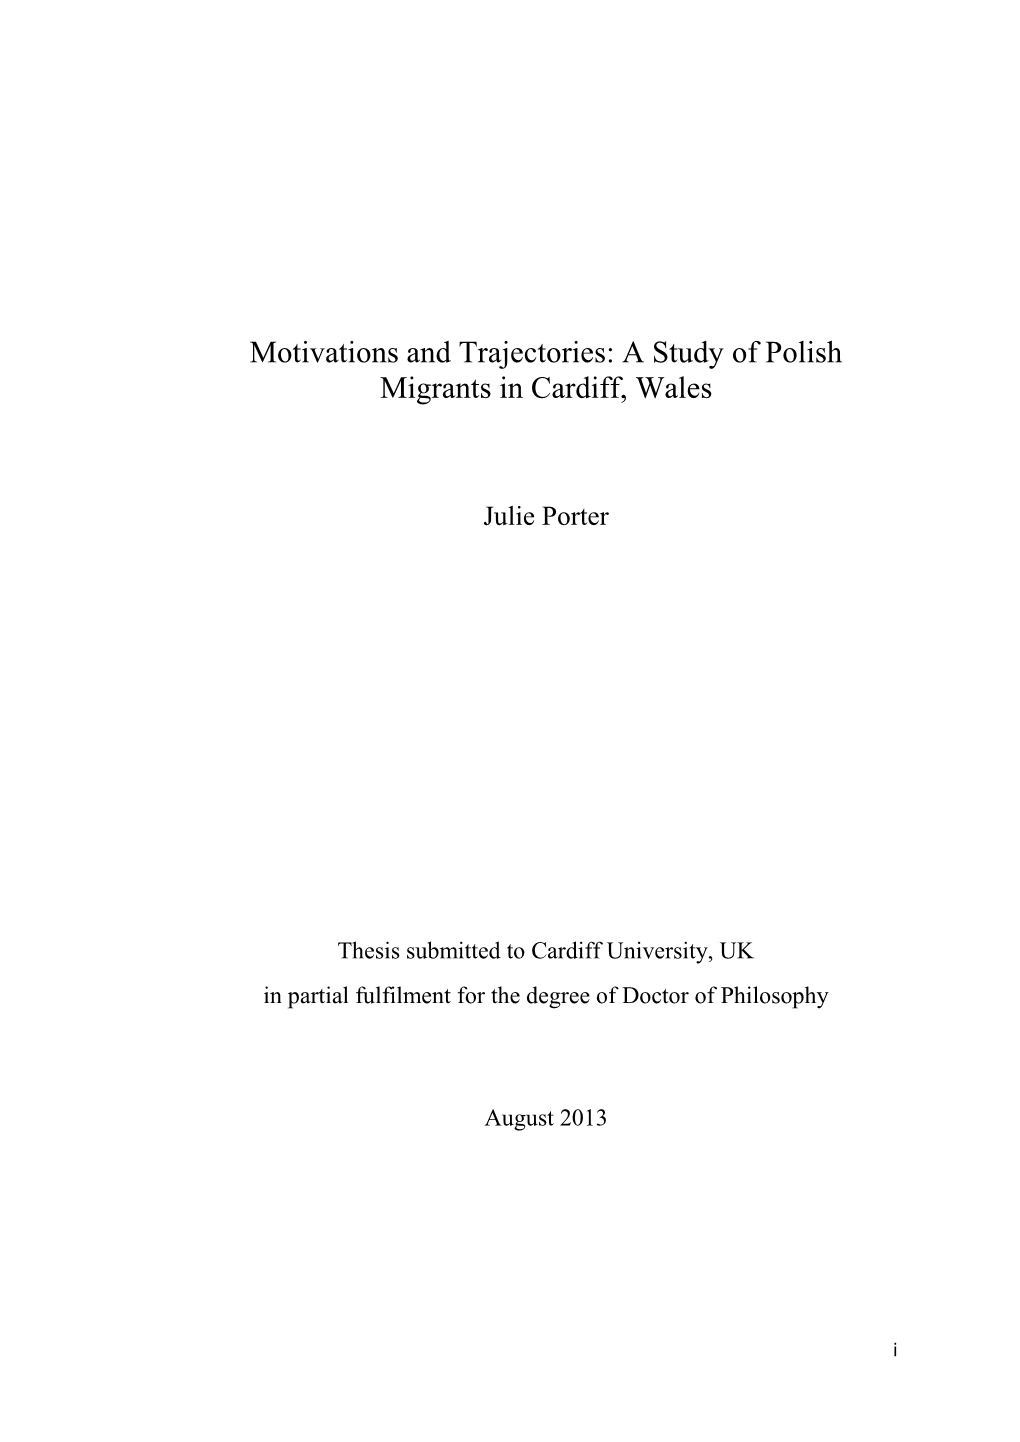 Motivations and Trajectories: a Study of Polish Migrants in Cardiff, Wales